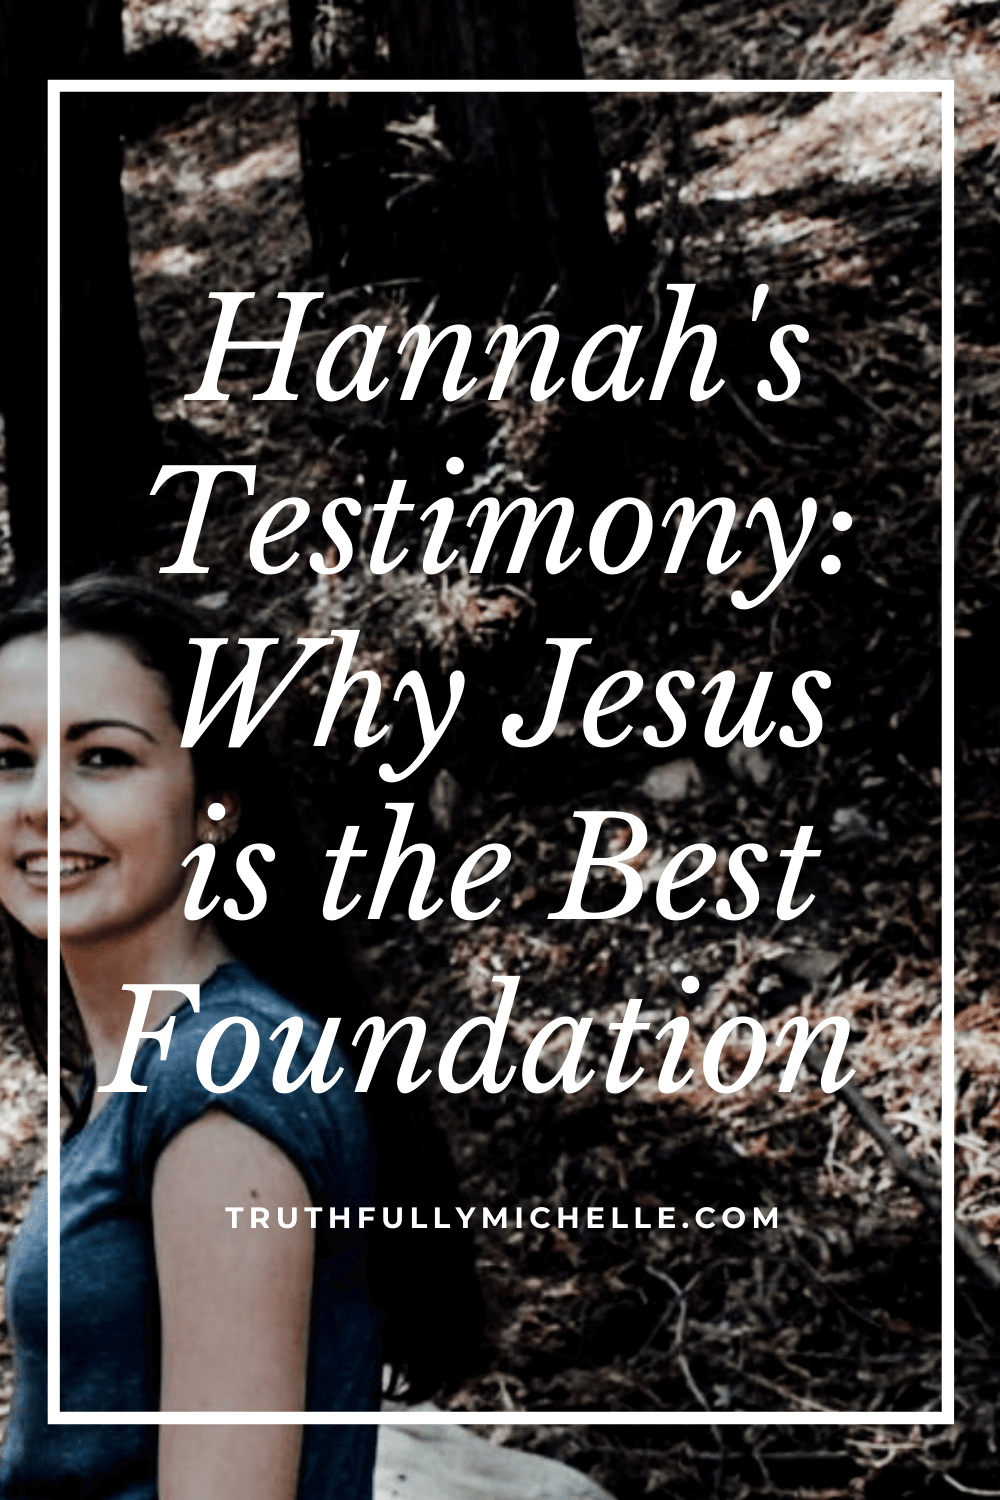 Christian testimony true stories, true Christian testimonies, Christian testimony examples, Christian testimony example, Christian testimonies, Finding God in our disappointments, god and disappointment, God and anxiety